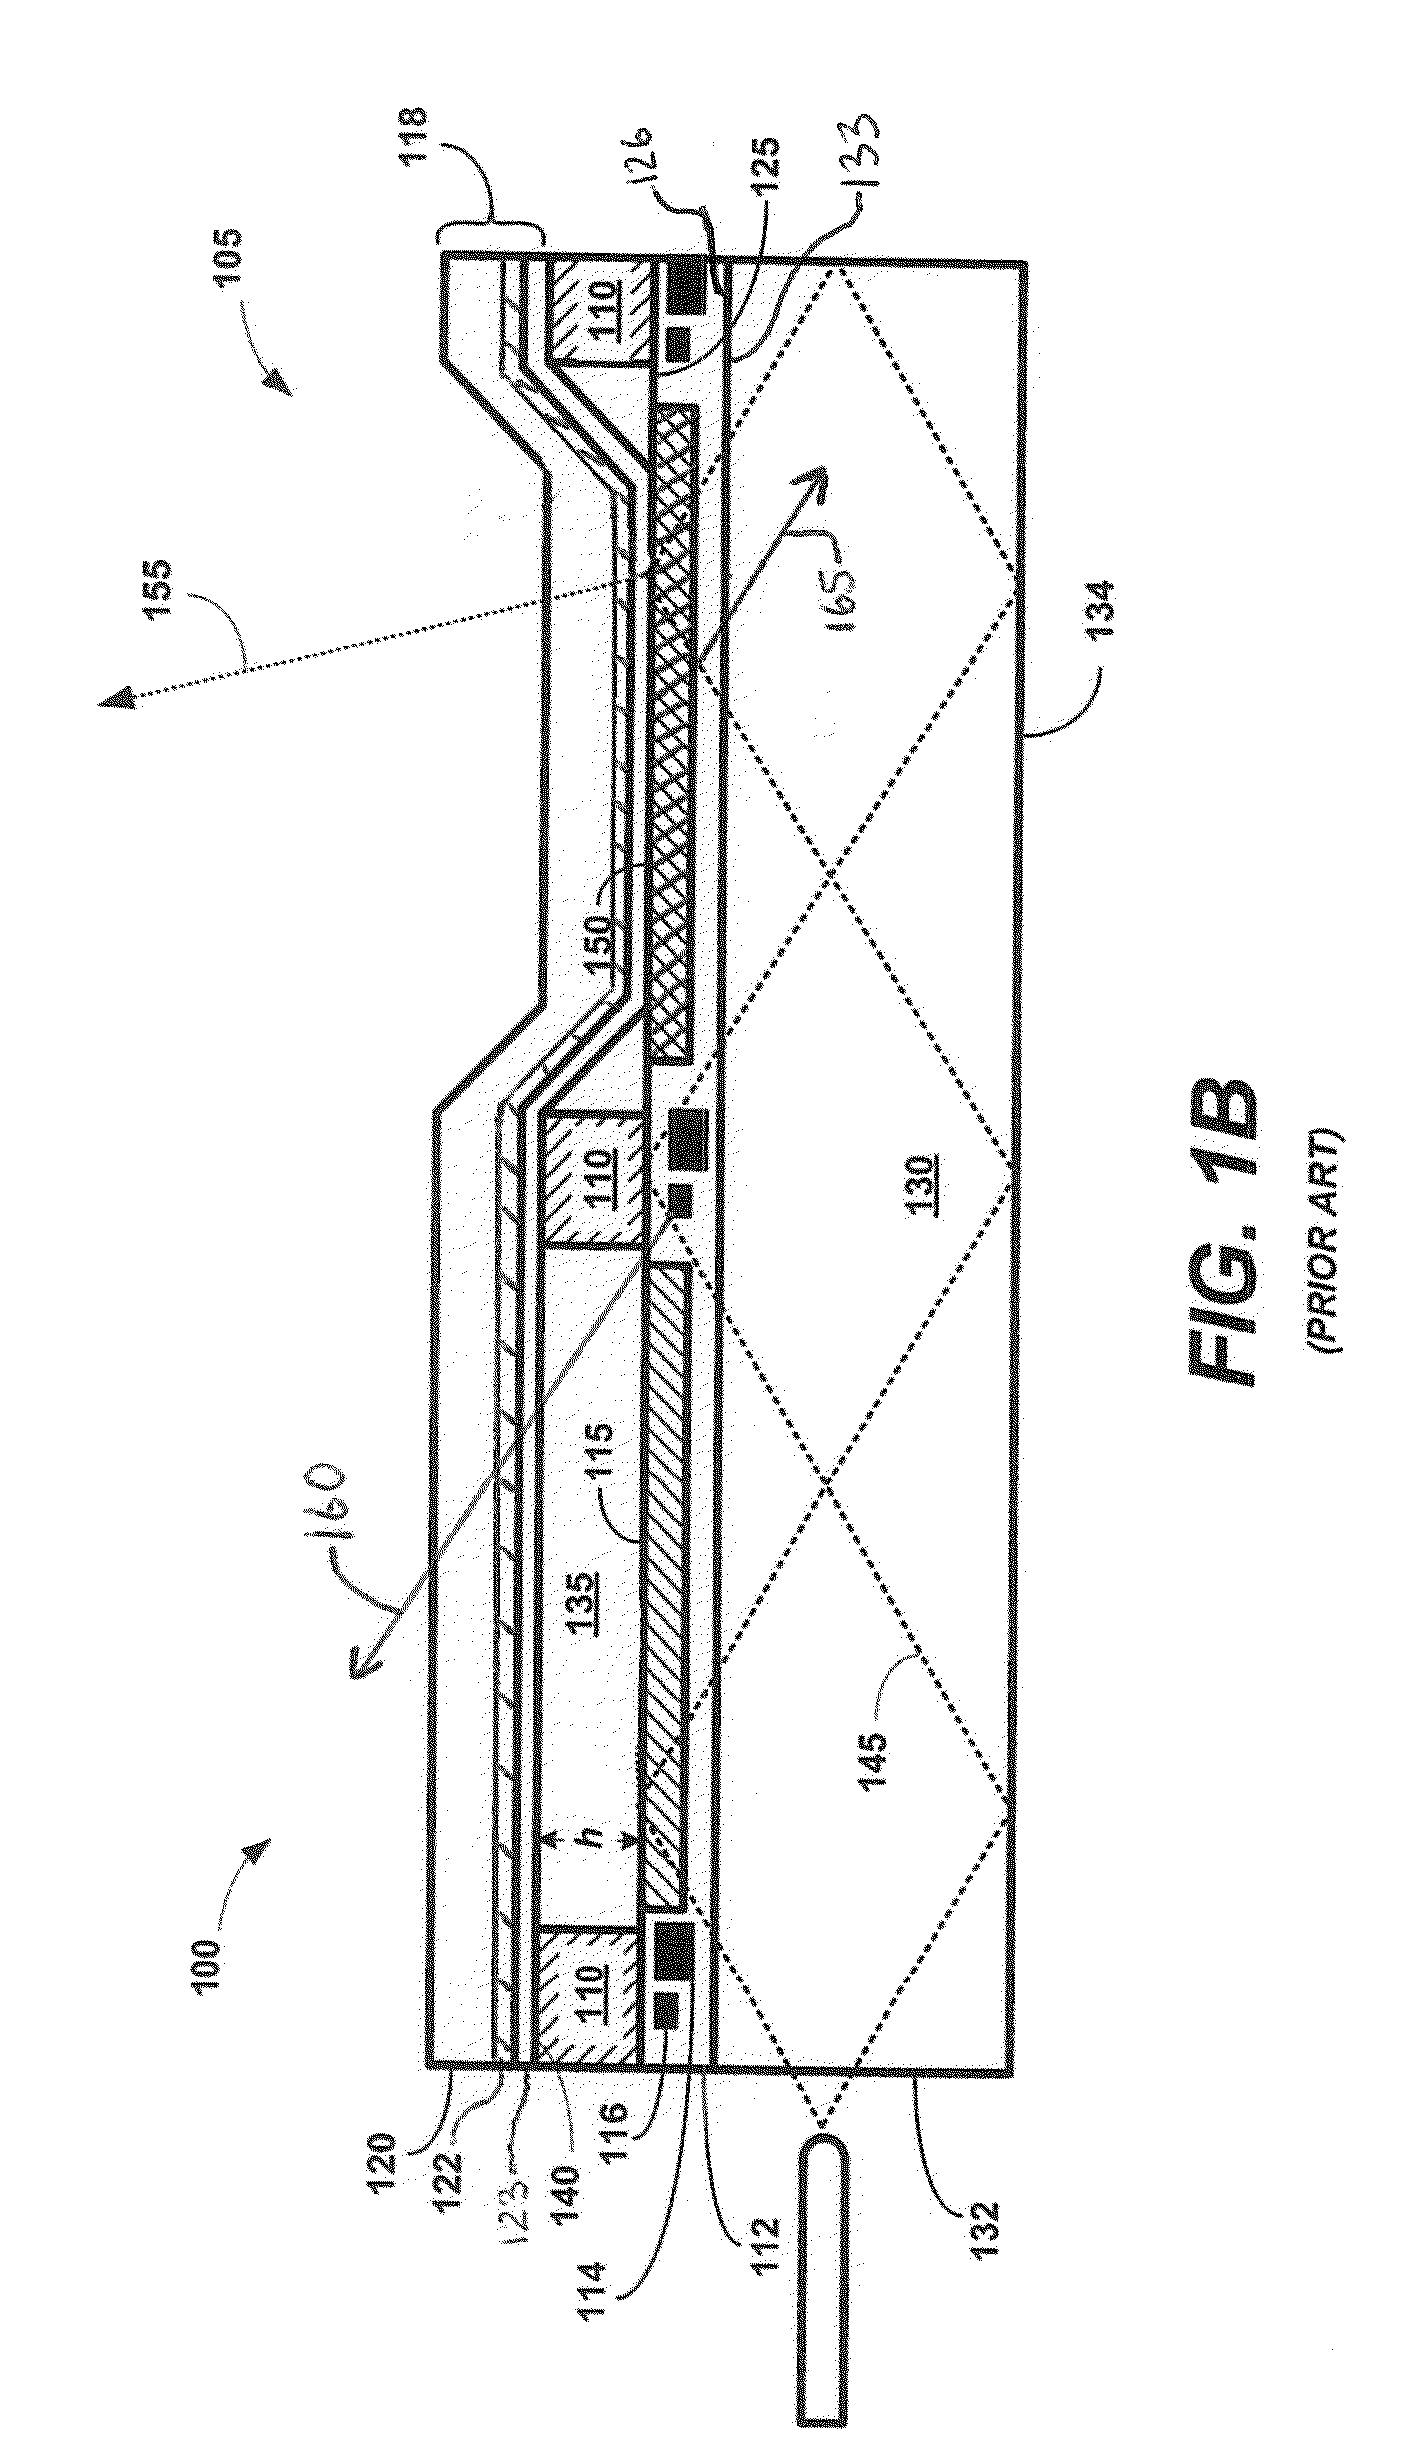 Normally emitting pixel architecture for frustrated total internal reflection displays